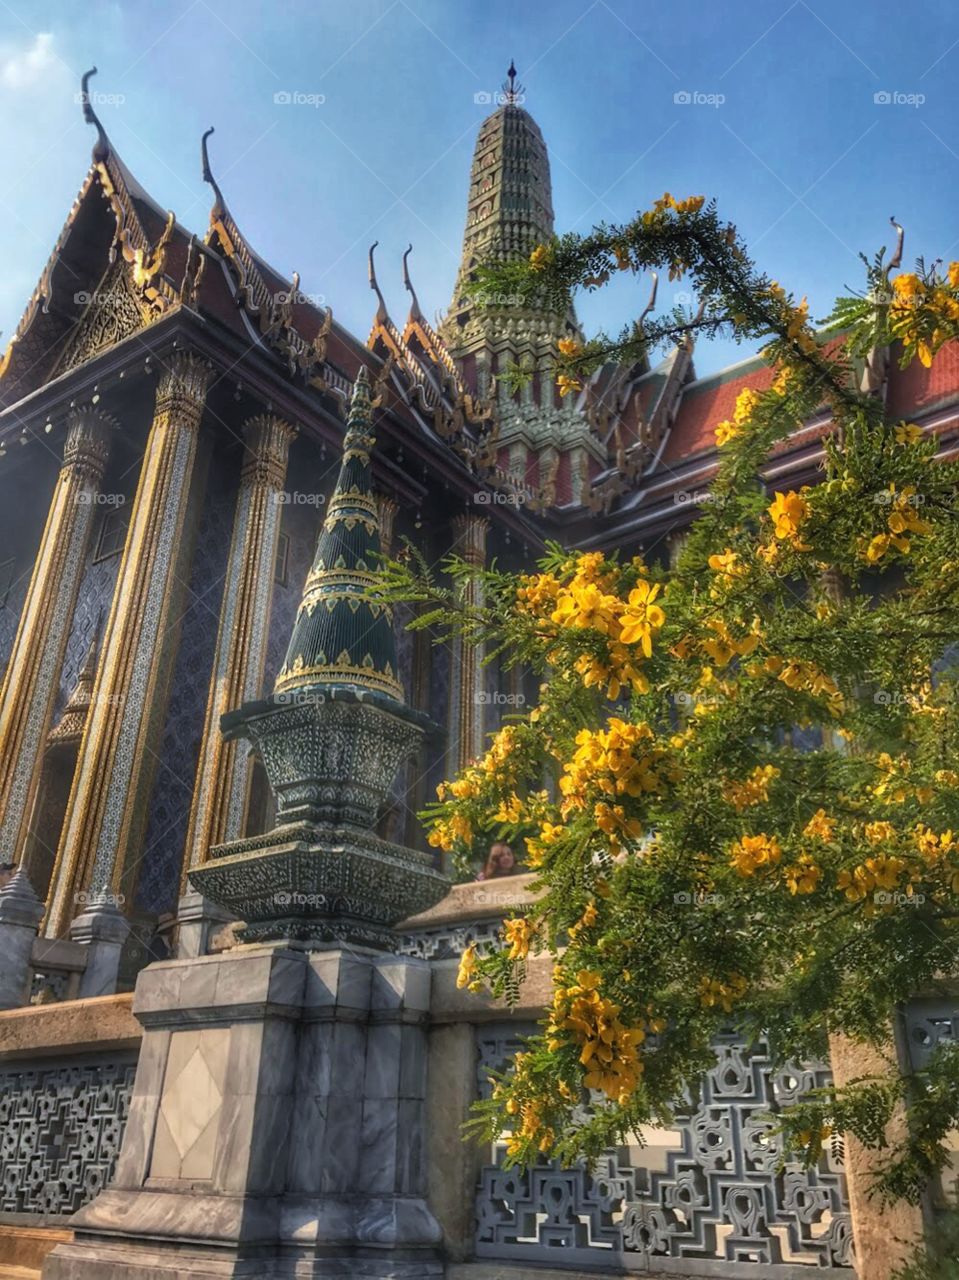 The palace in Thailand